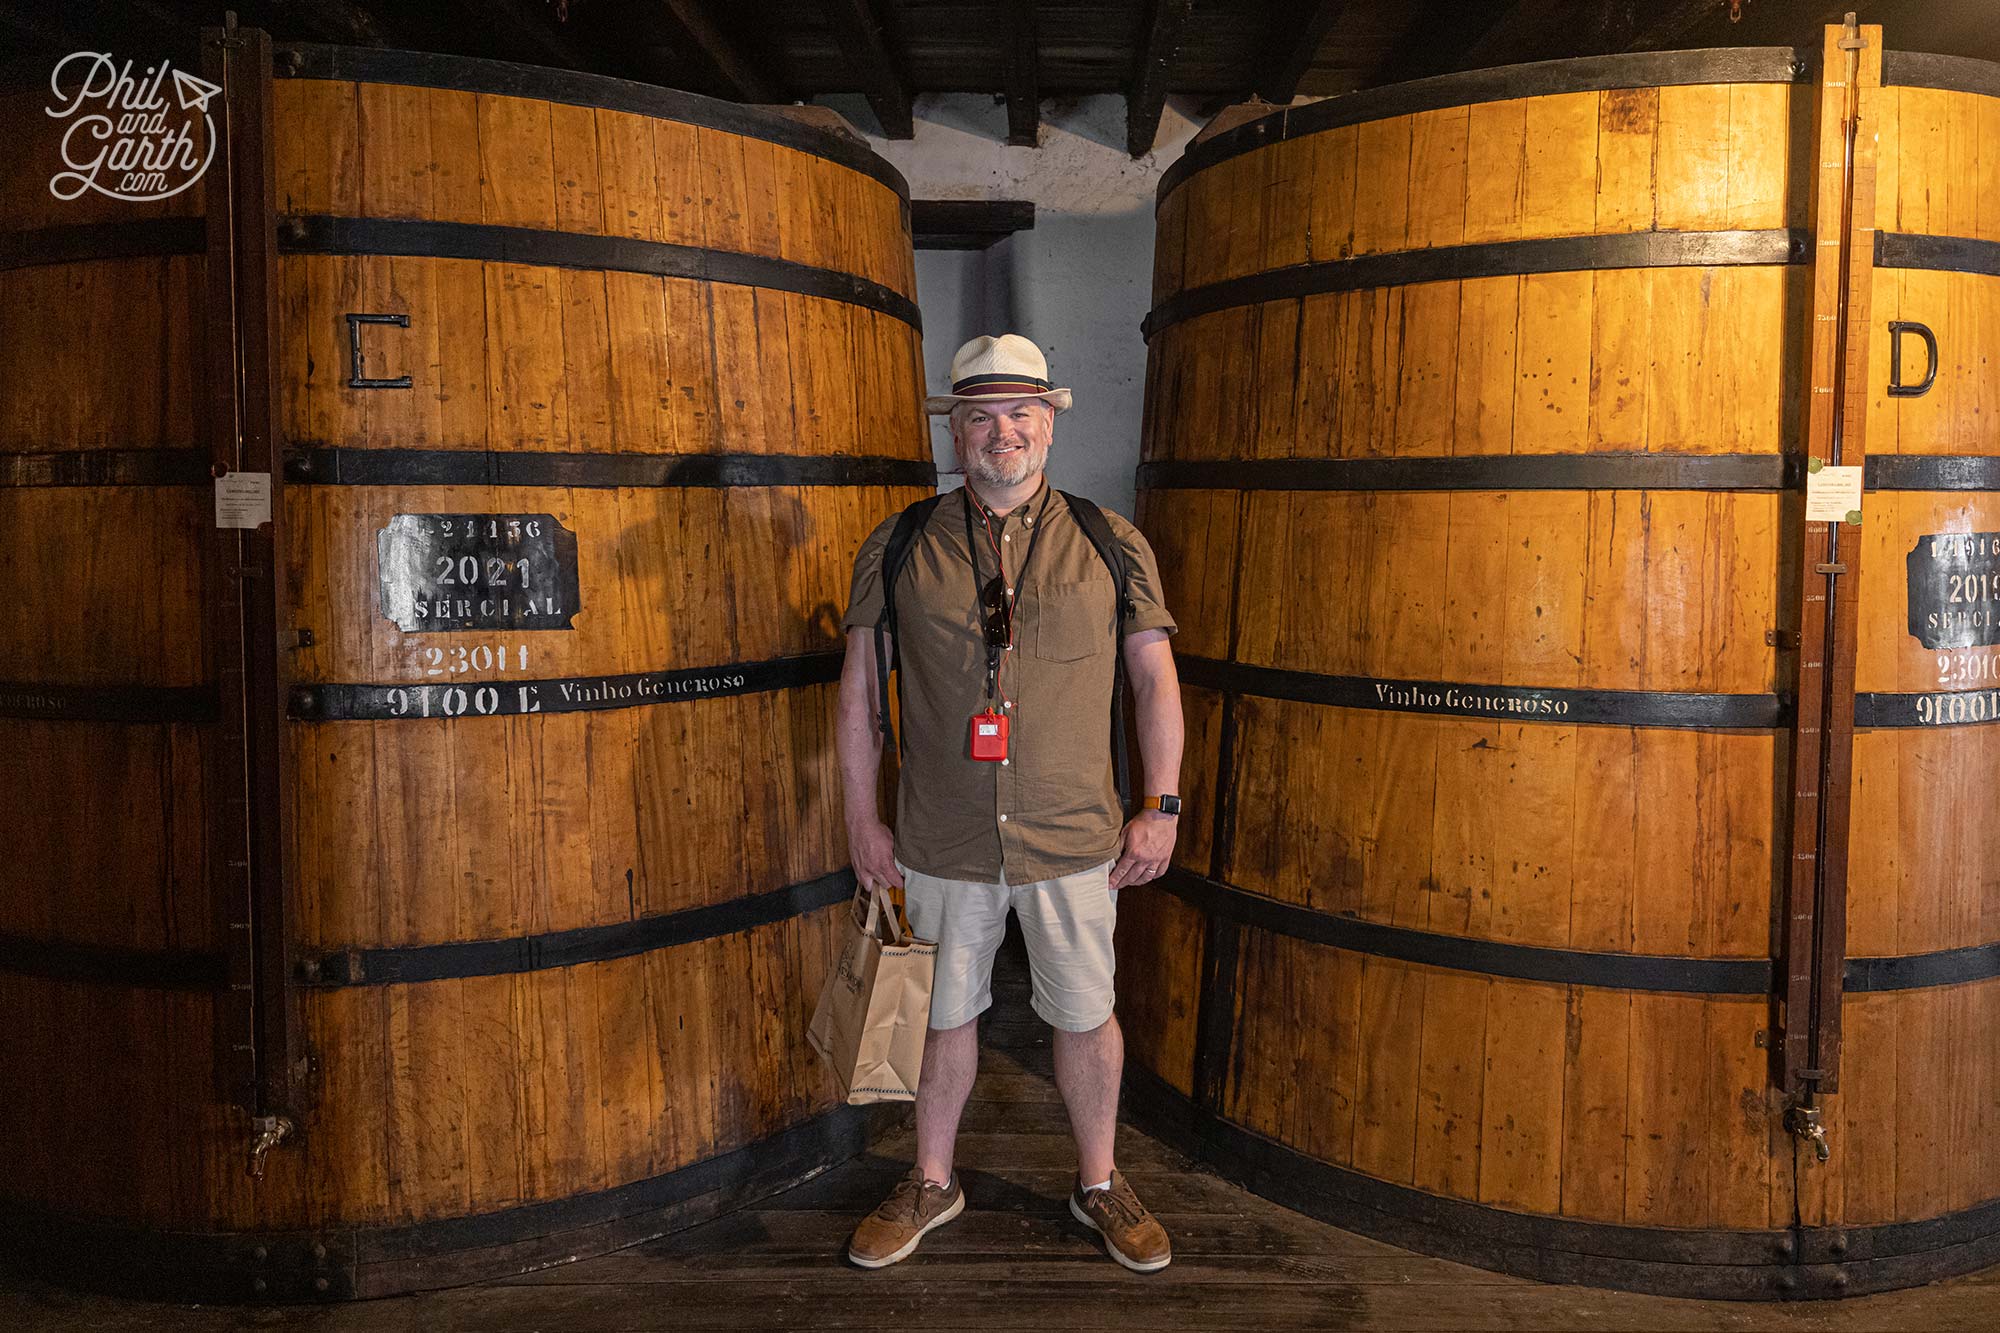 Phil stood next to the some of Blandys giant wine barrels